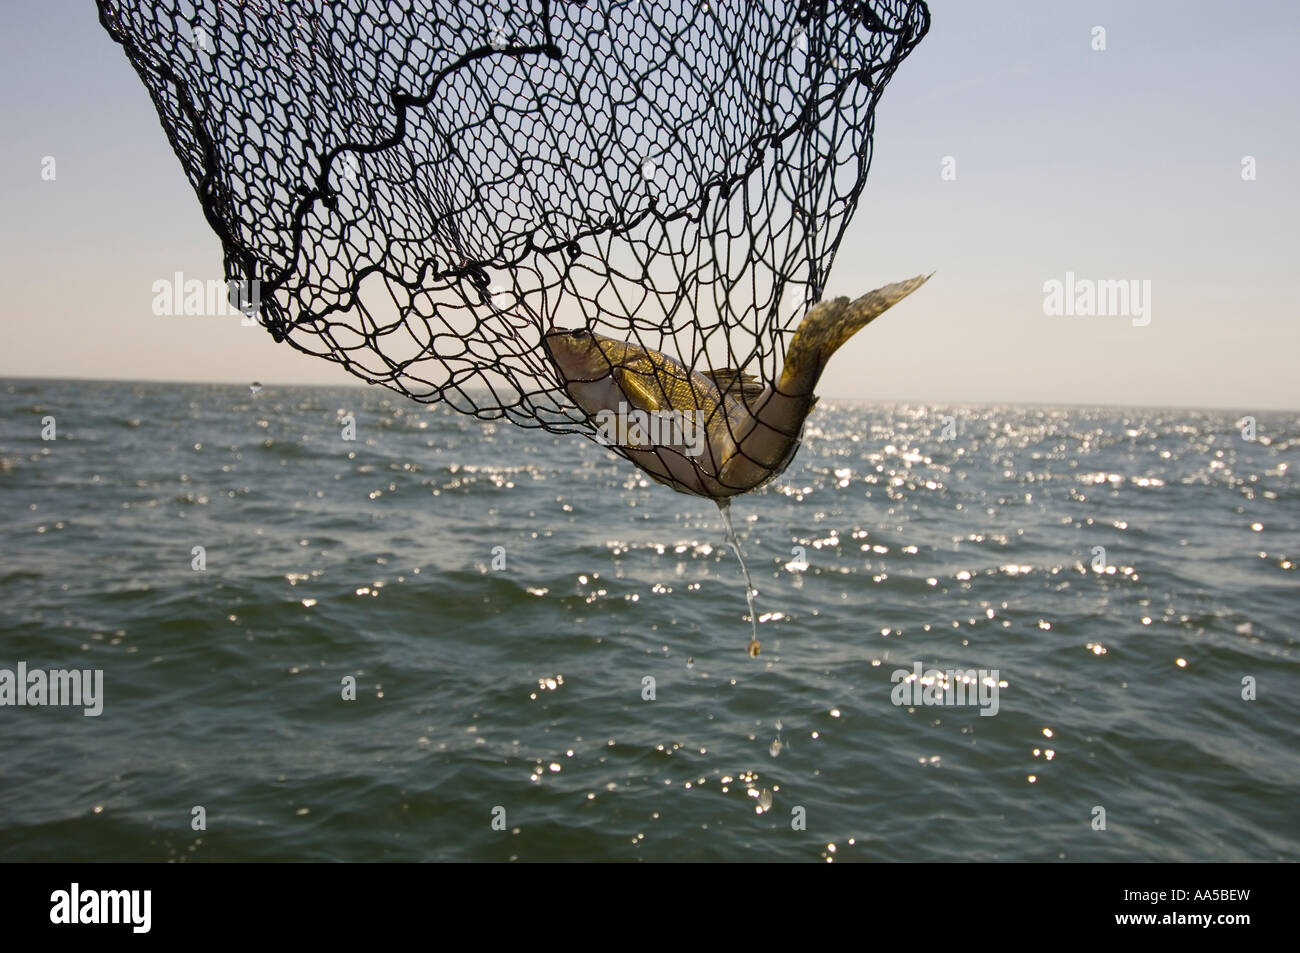 A WALLEYE IN A FISHING NET HANGS OVER THE HORIZON OF LAKE MILLE